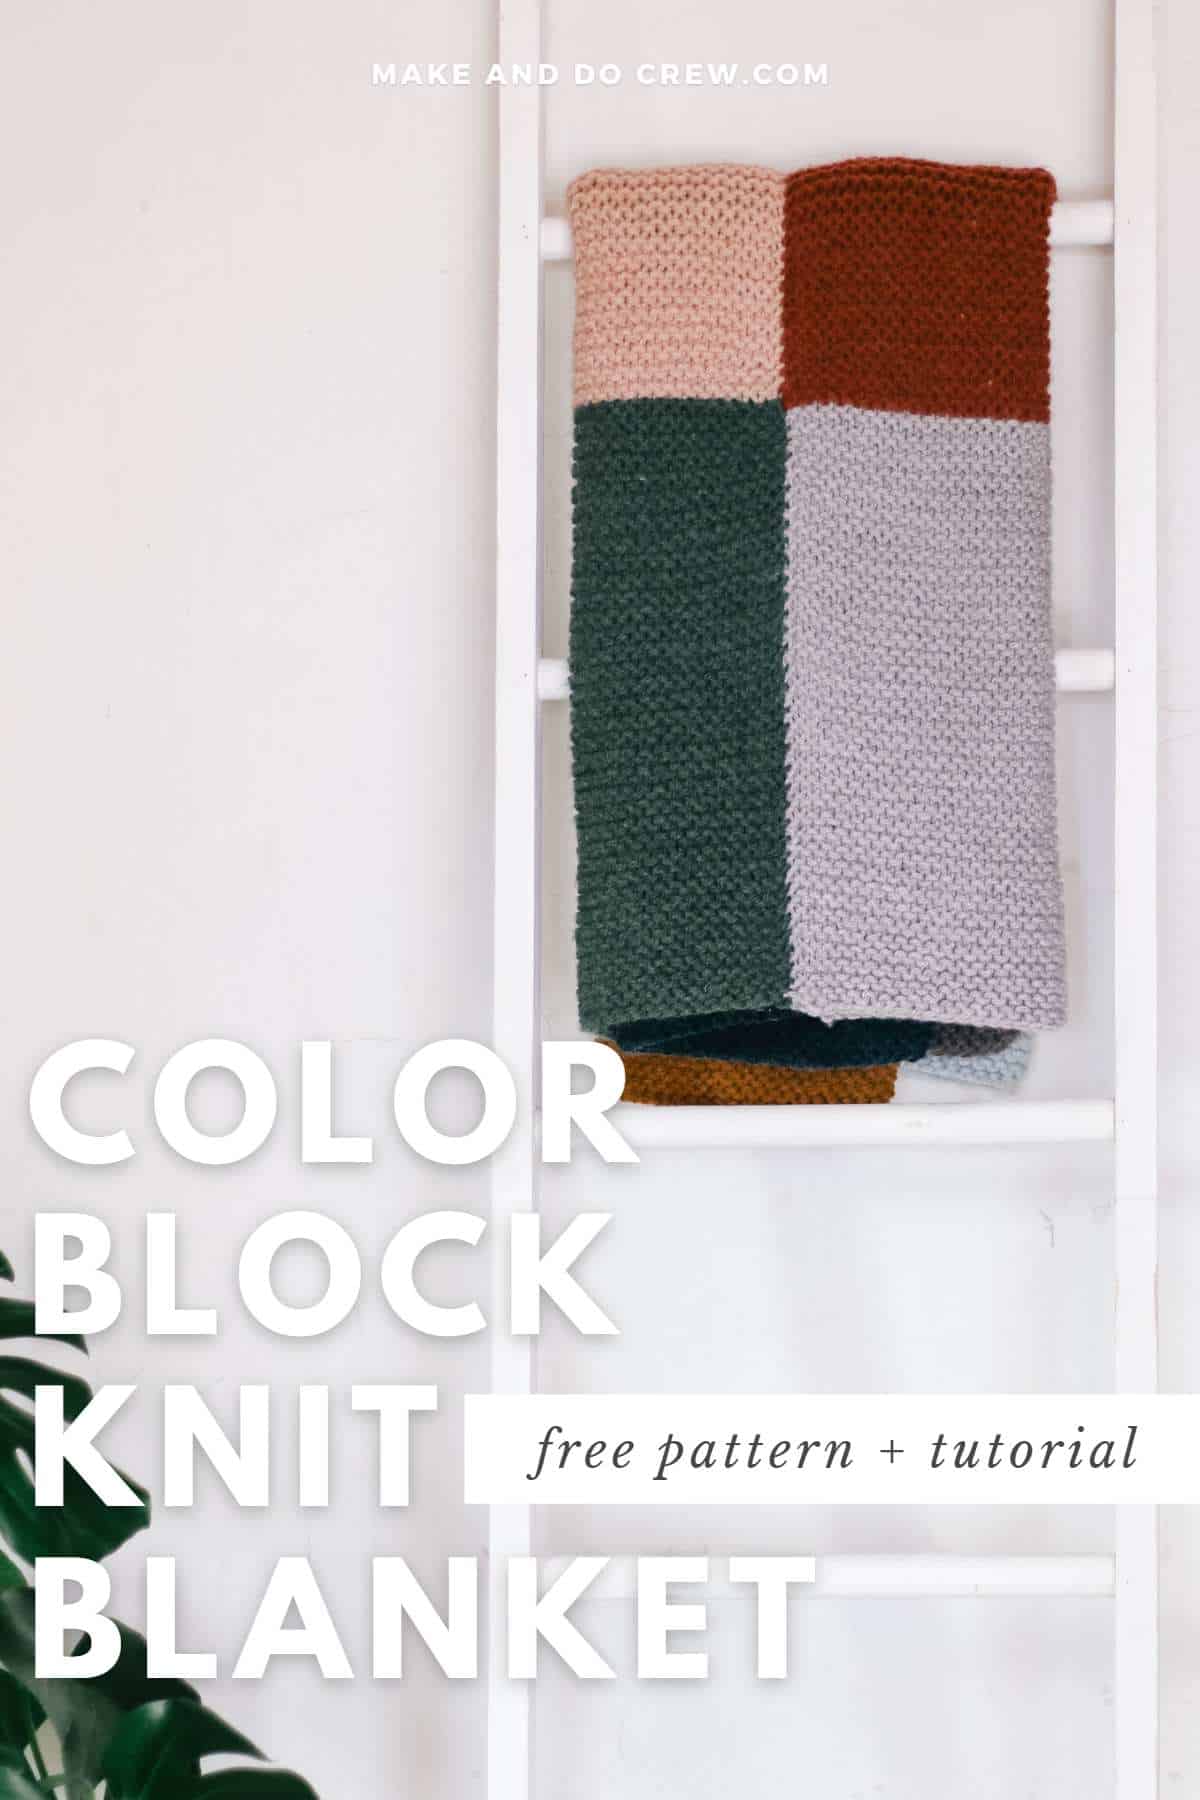 How to Knit a Blanket with Straight Needles: Circular knitting